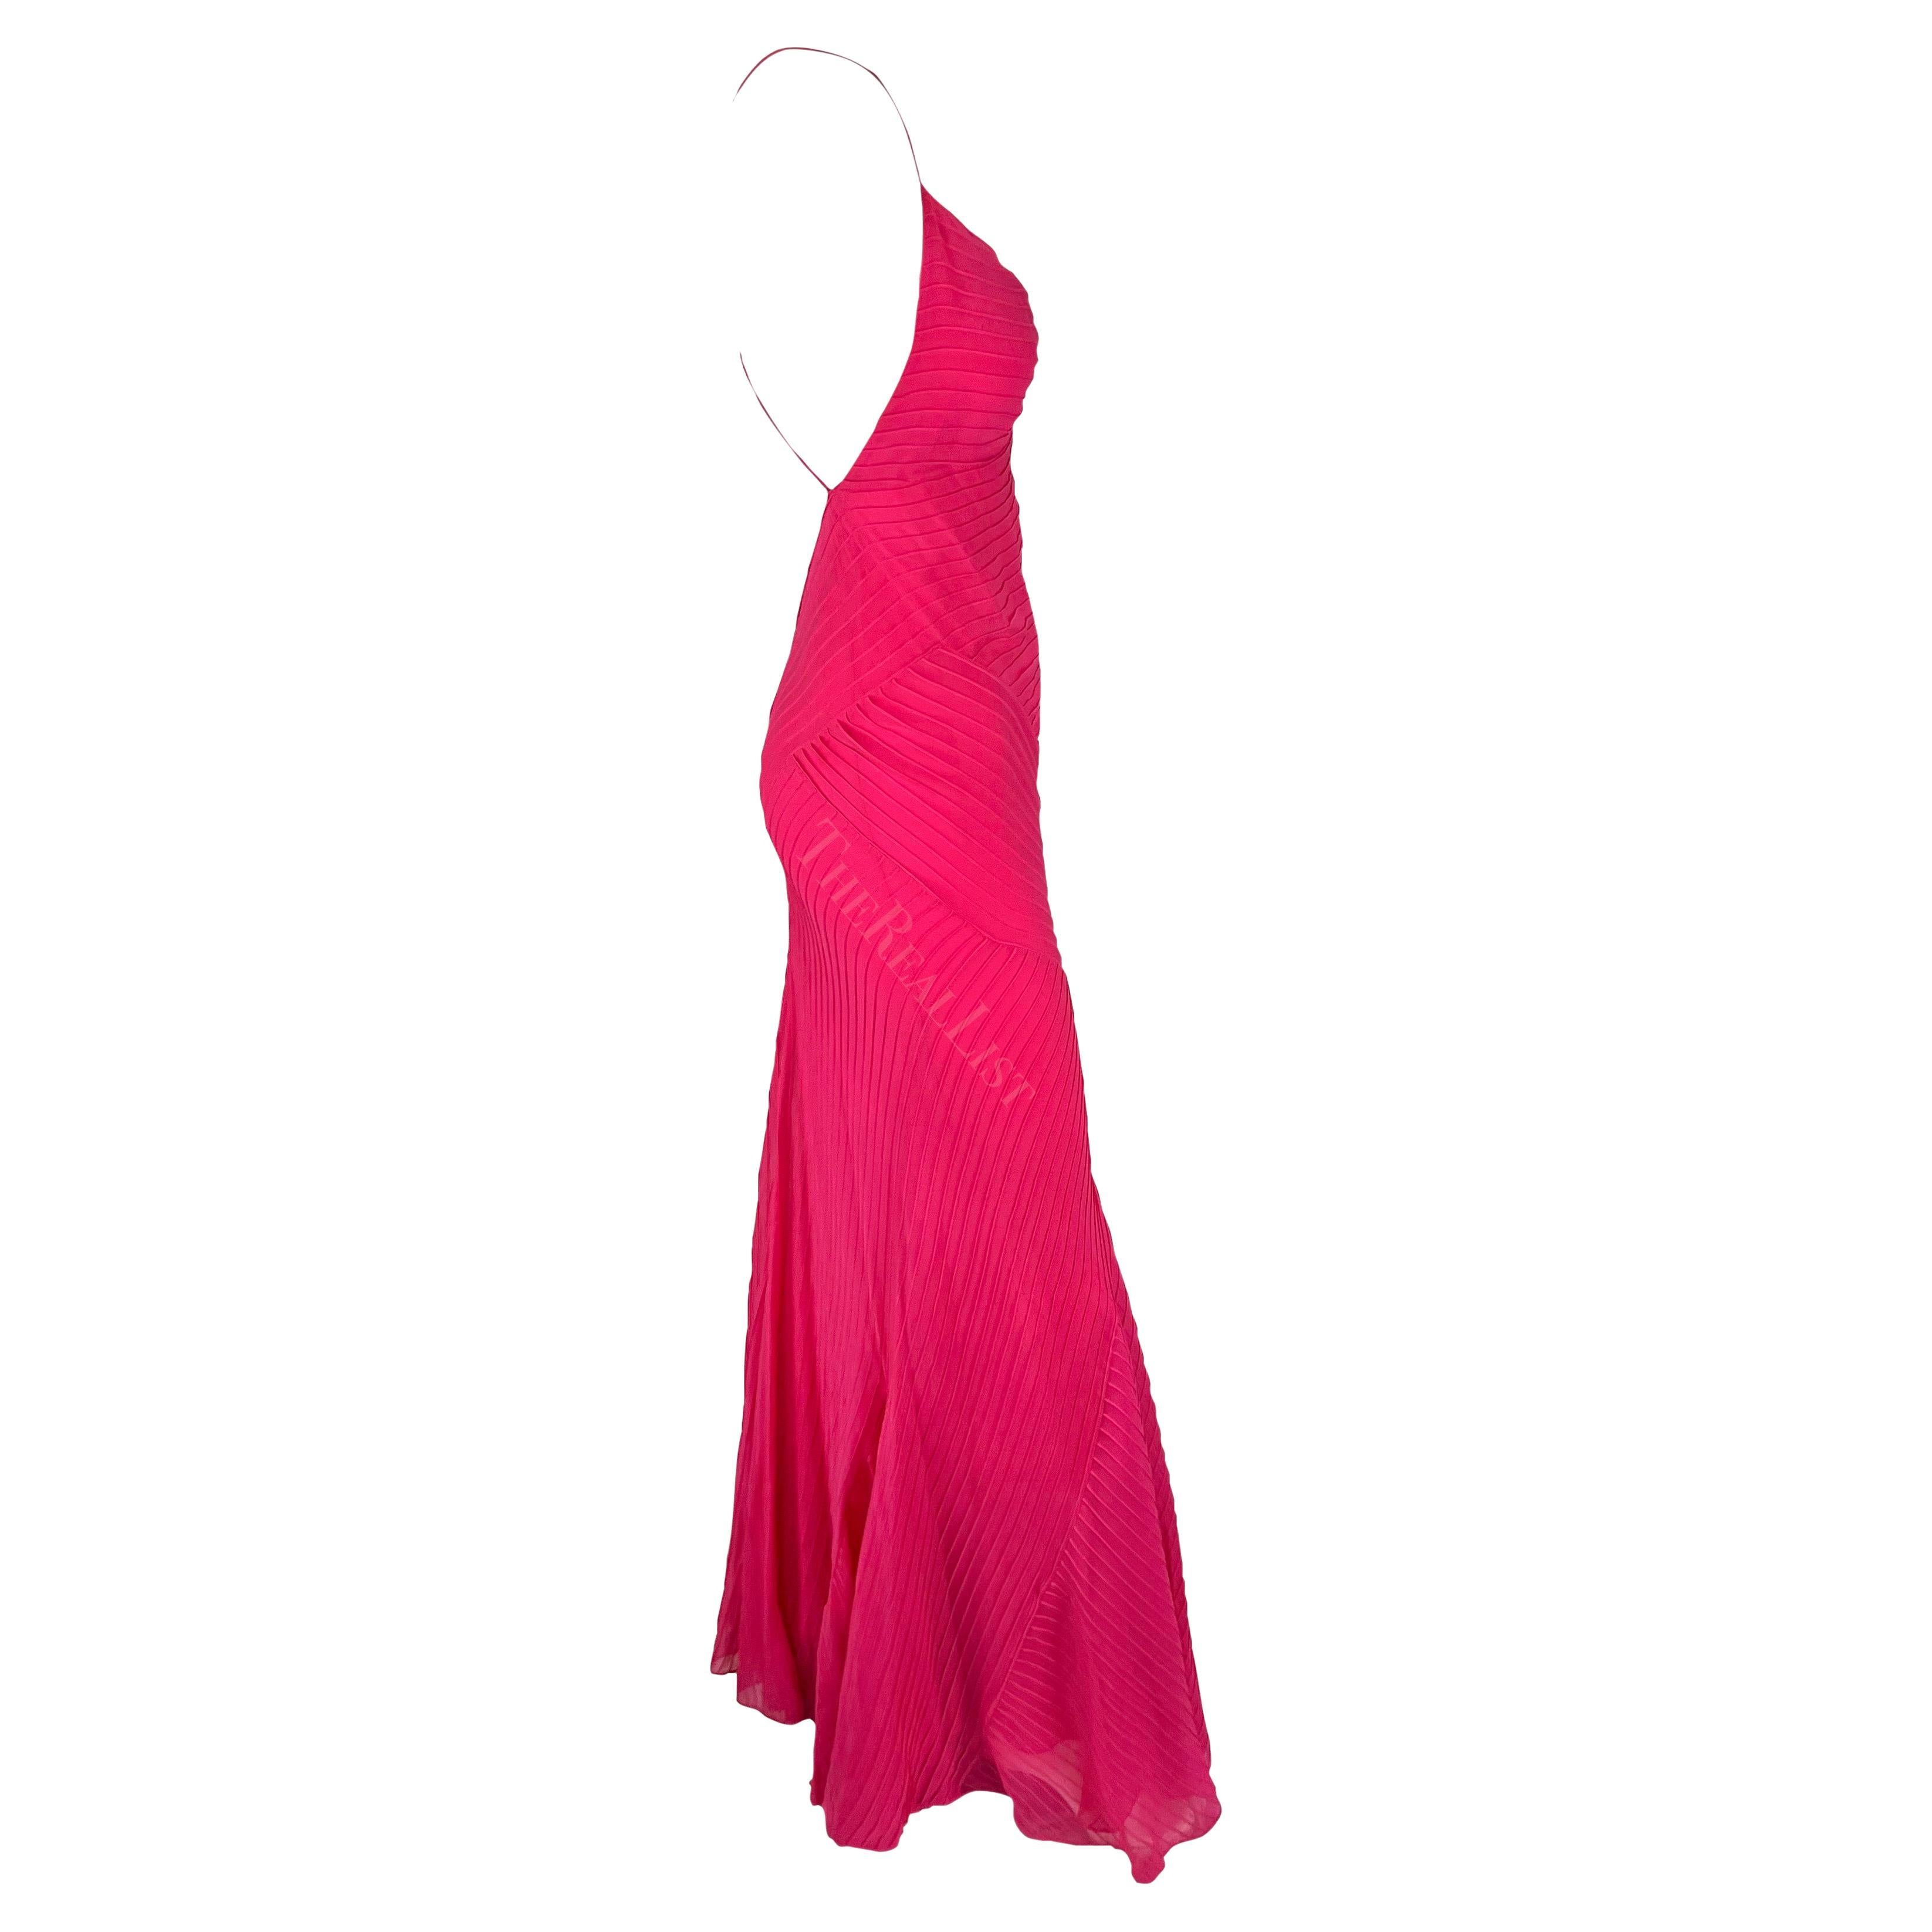 S/S 2004 Ralph Lauren Runway Hot Pink Pleated Chiffon Backless Cowl Gown 8